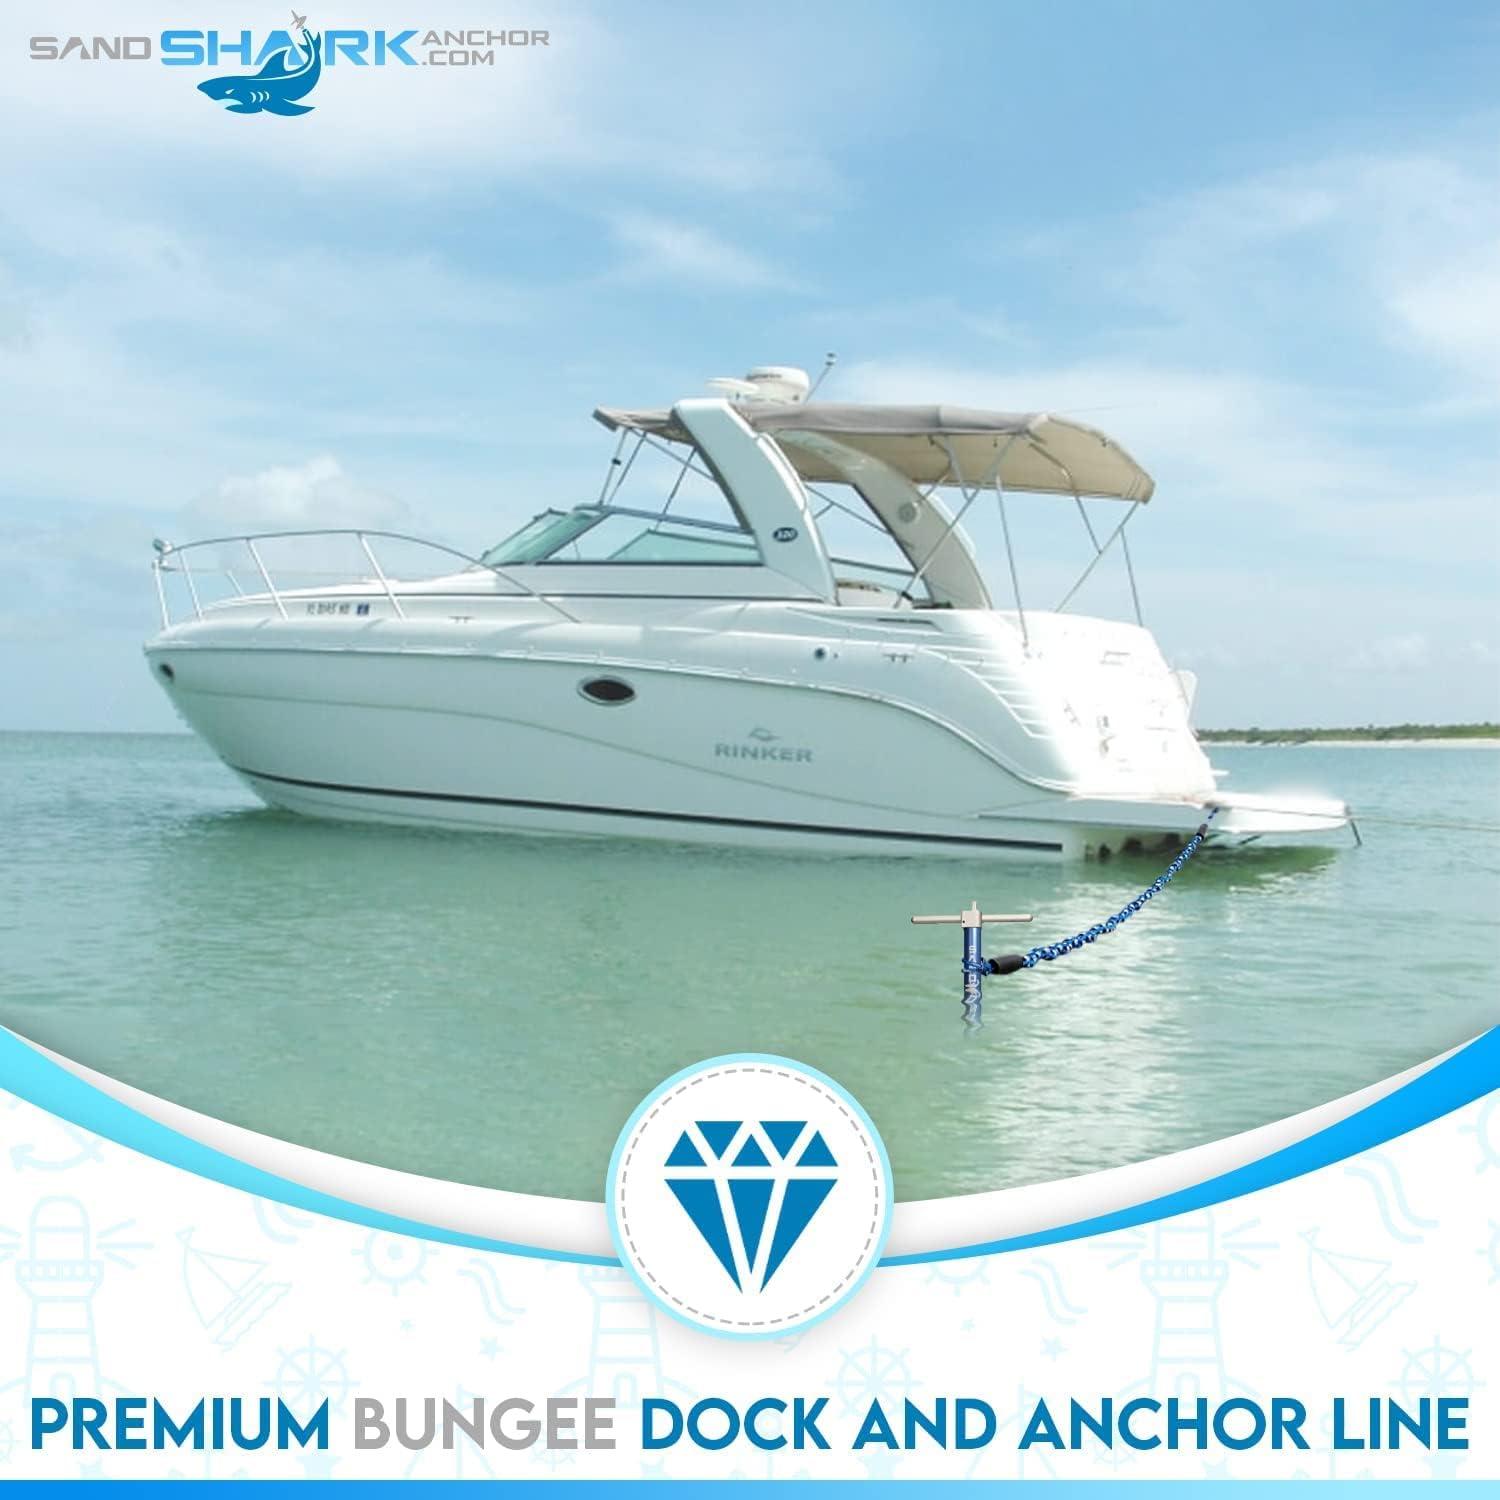 Stretches 7-14ft Premium Anchor Bungee Dock Line. Absorbs Shock to Anchors  and Docks w/Stainless Steel Clip. Designed for SandShark Anchors. Neon Green